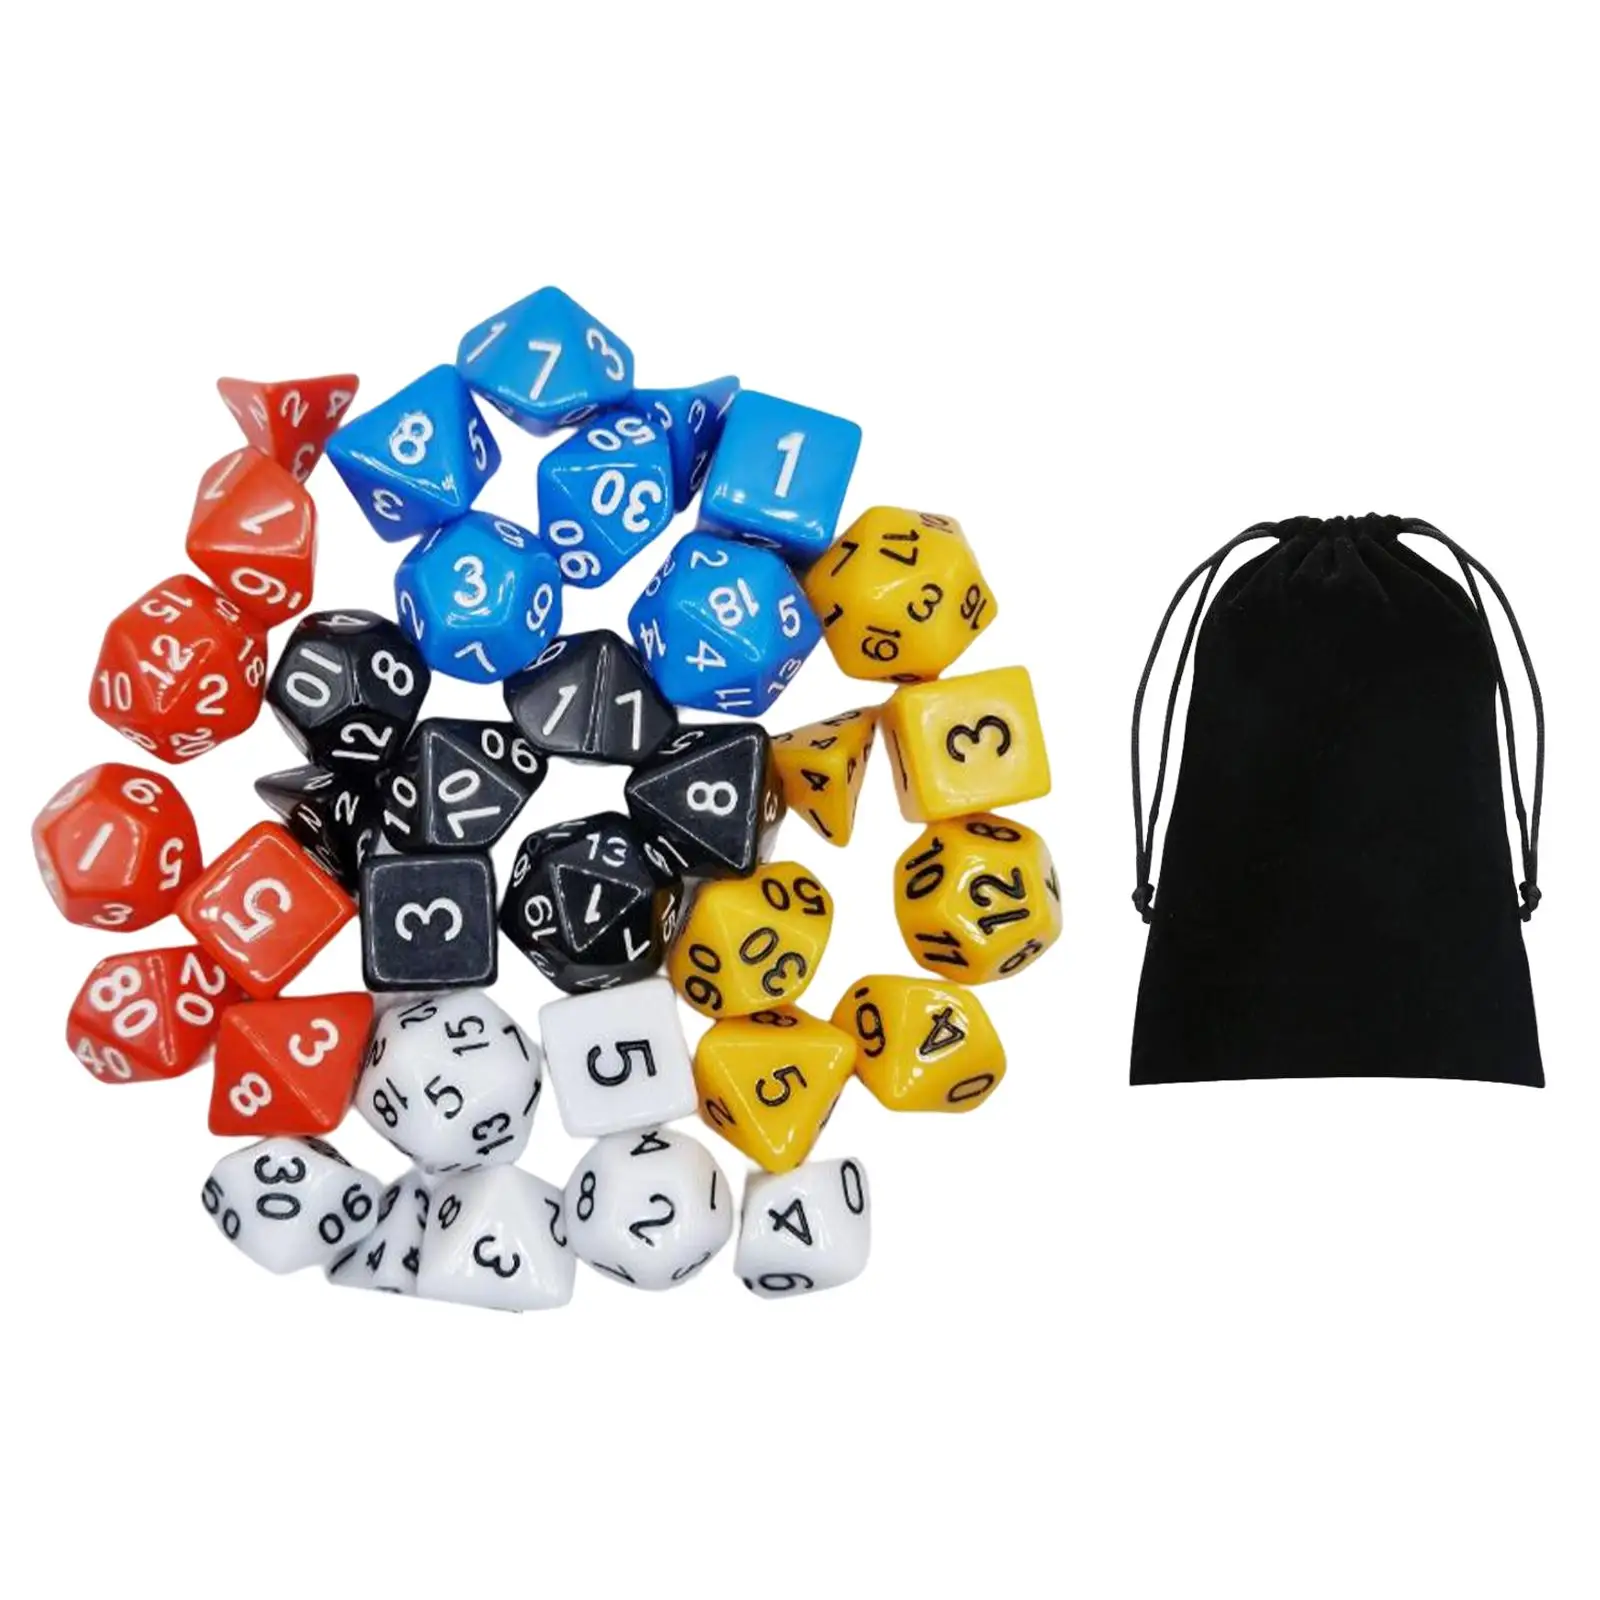 35 Pieces Polyhedral Dices Set Math Teaching Durable Rolling Dices for Board Game Props